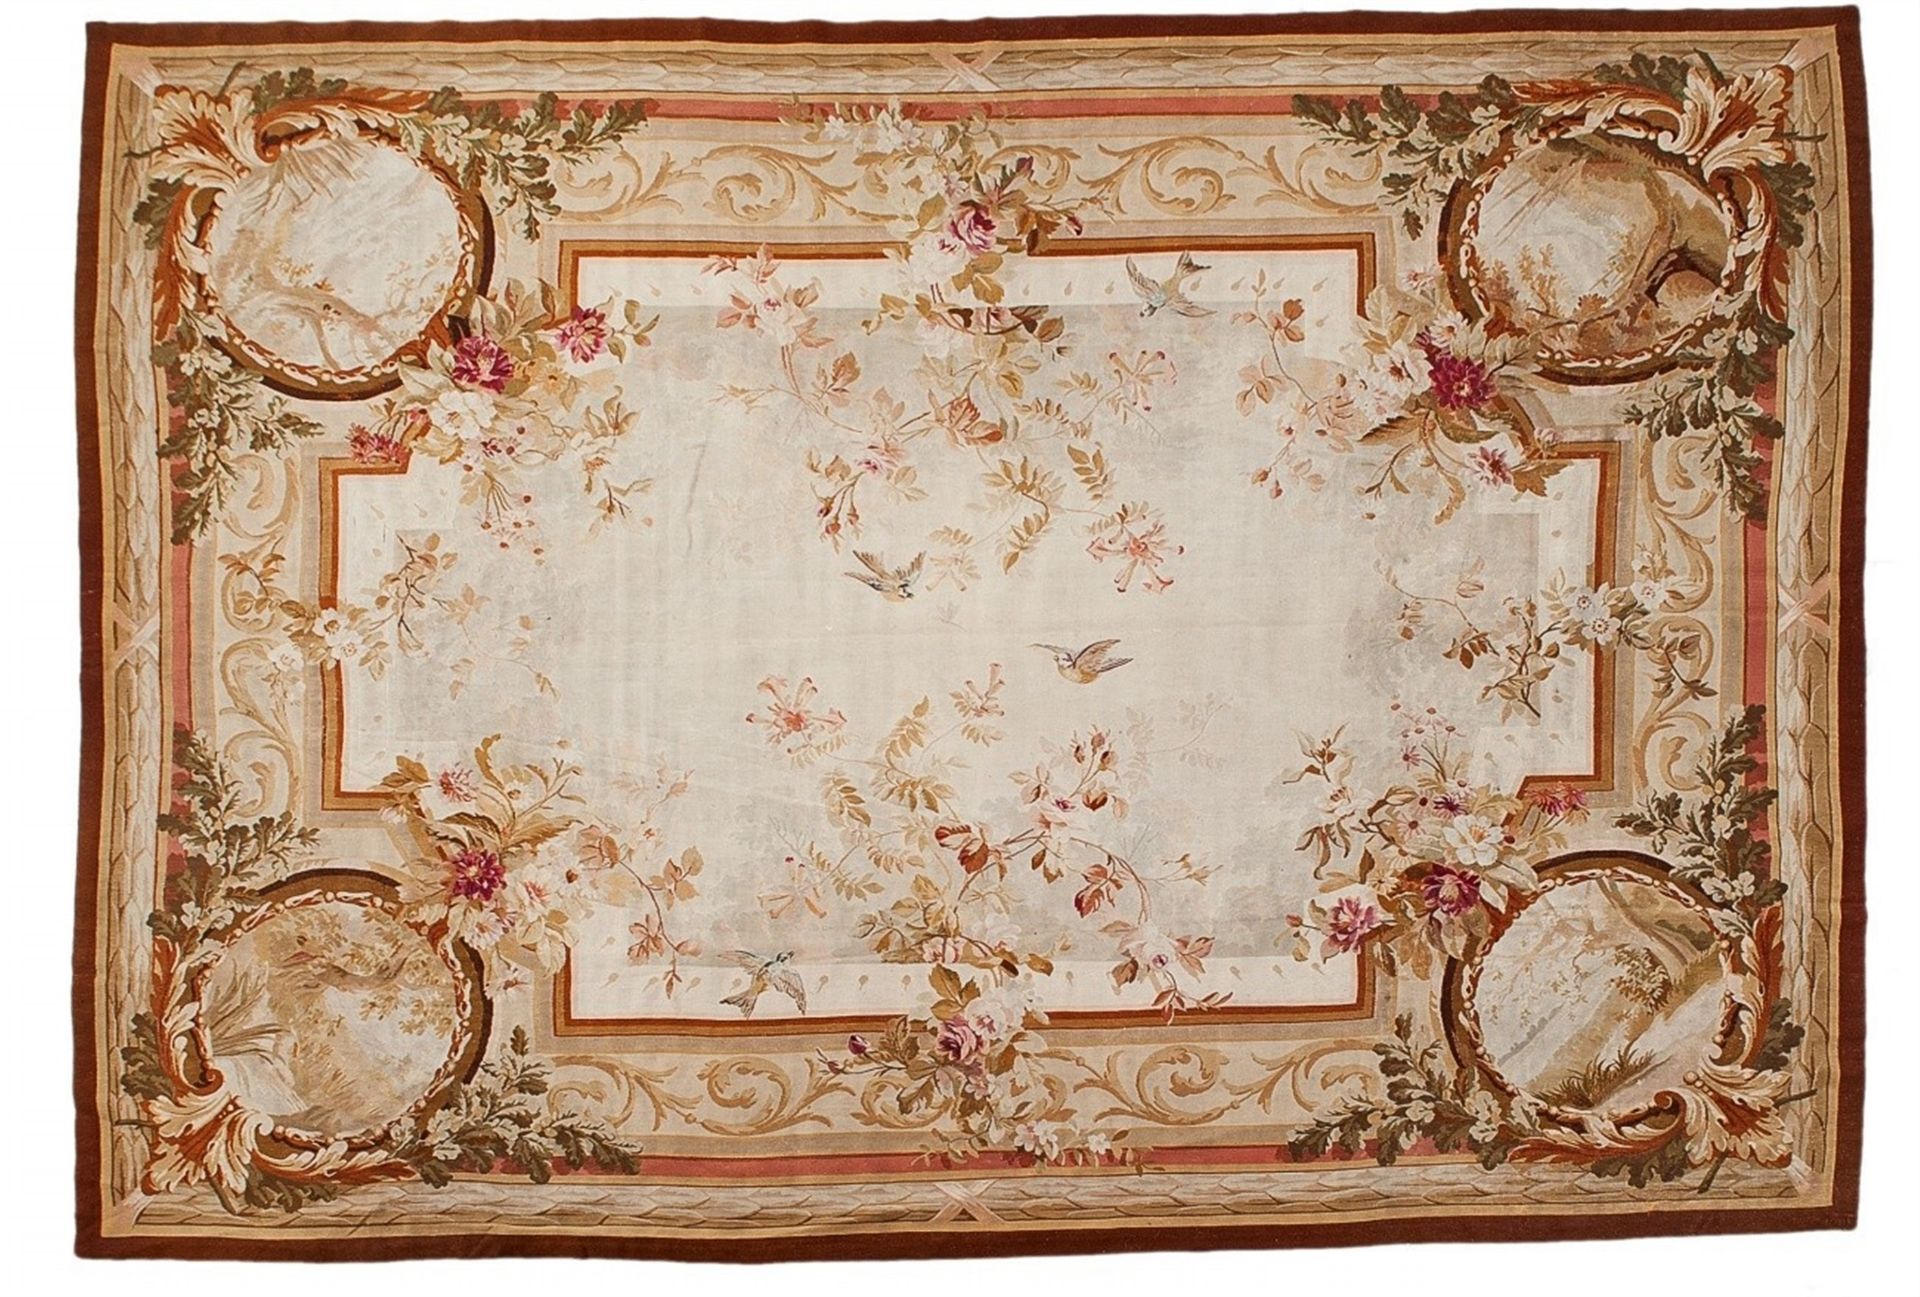 An Aubusson tapestry with an illusionist motif